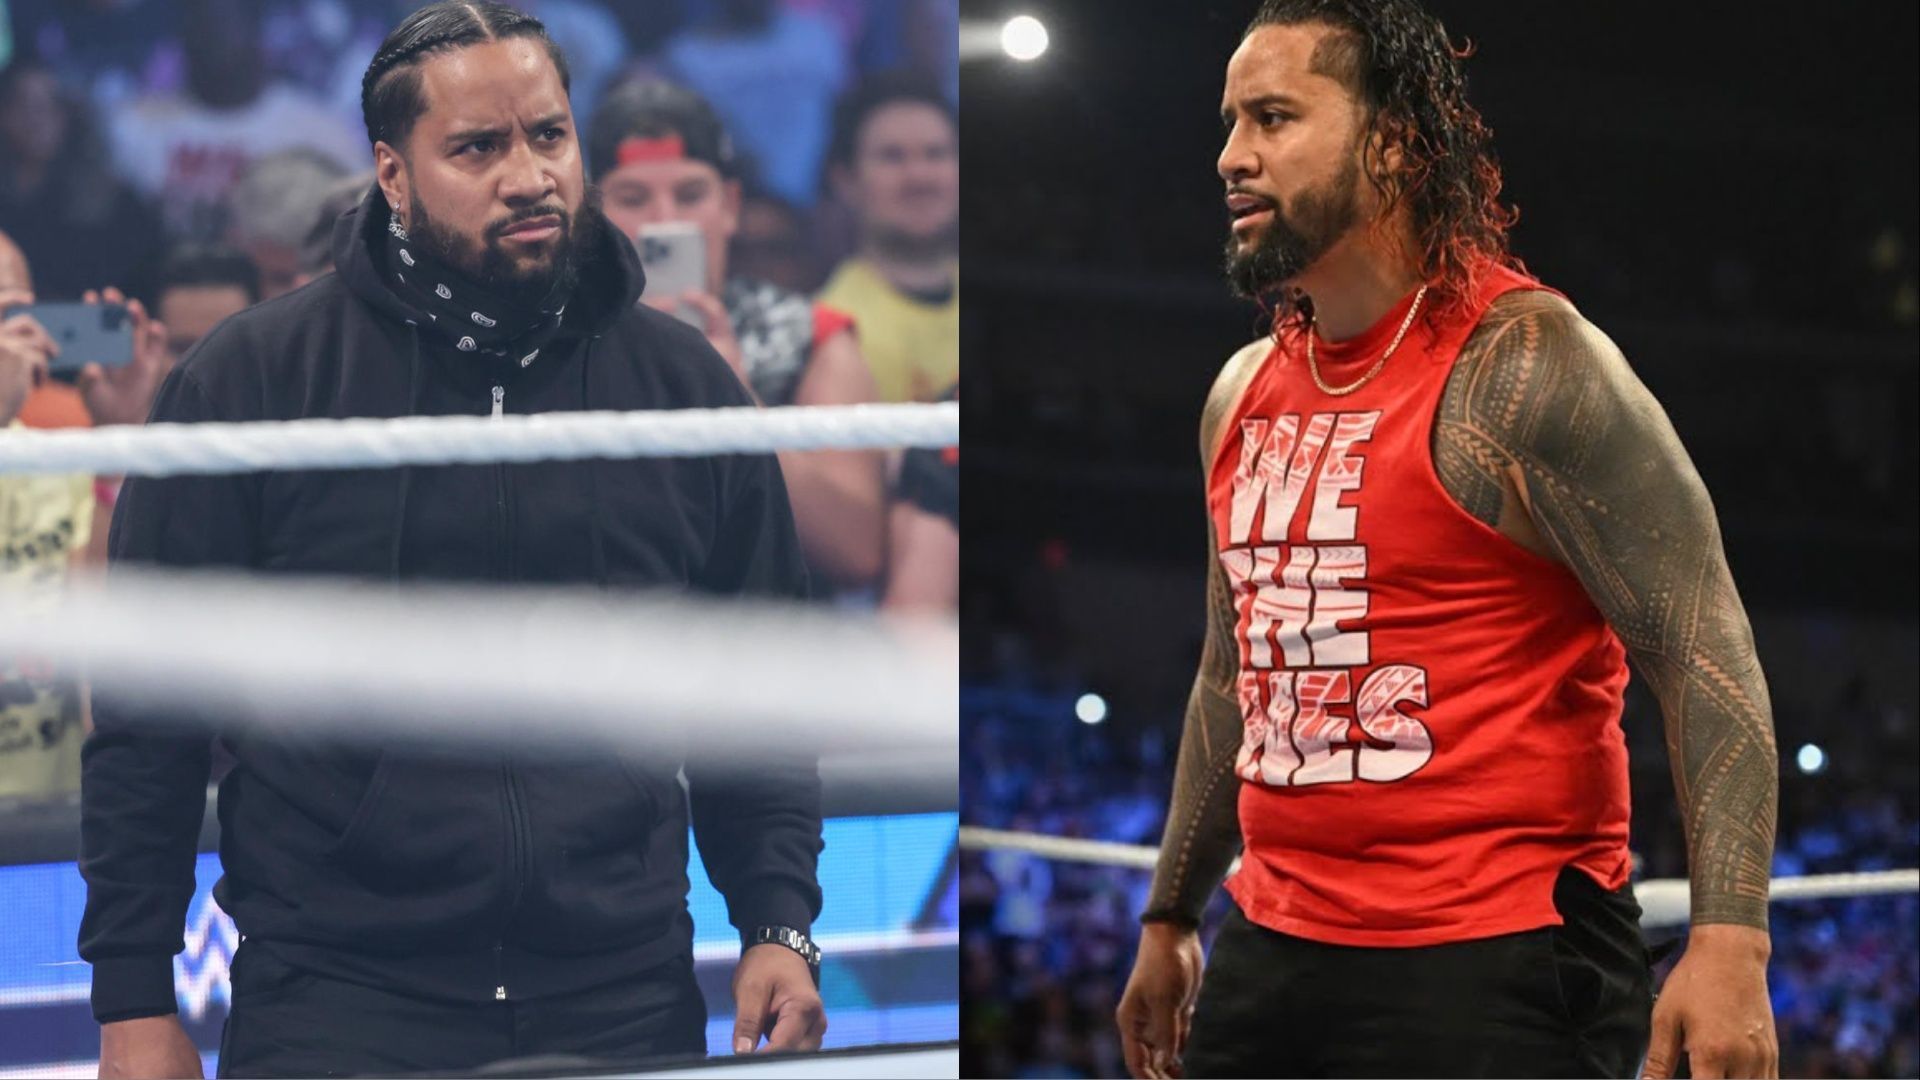 Jimmy Uso debuted a new theme song last week on WWE SmackDown.